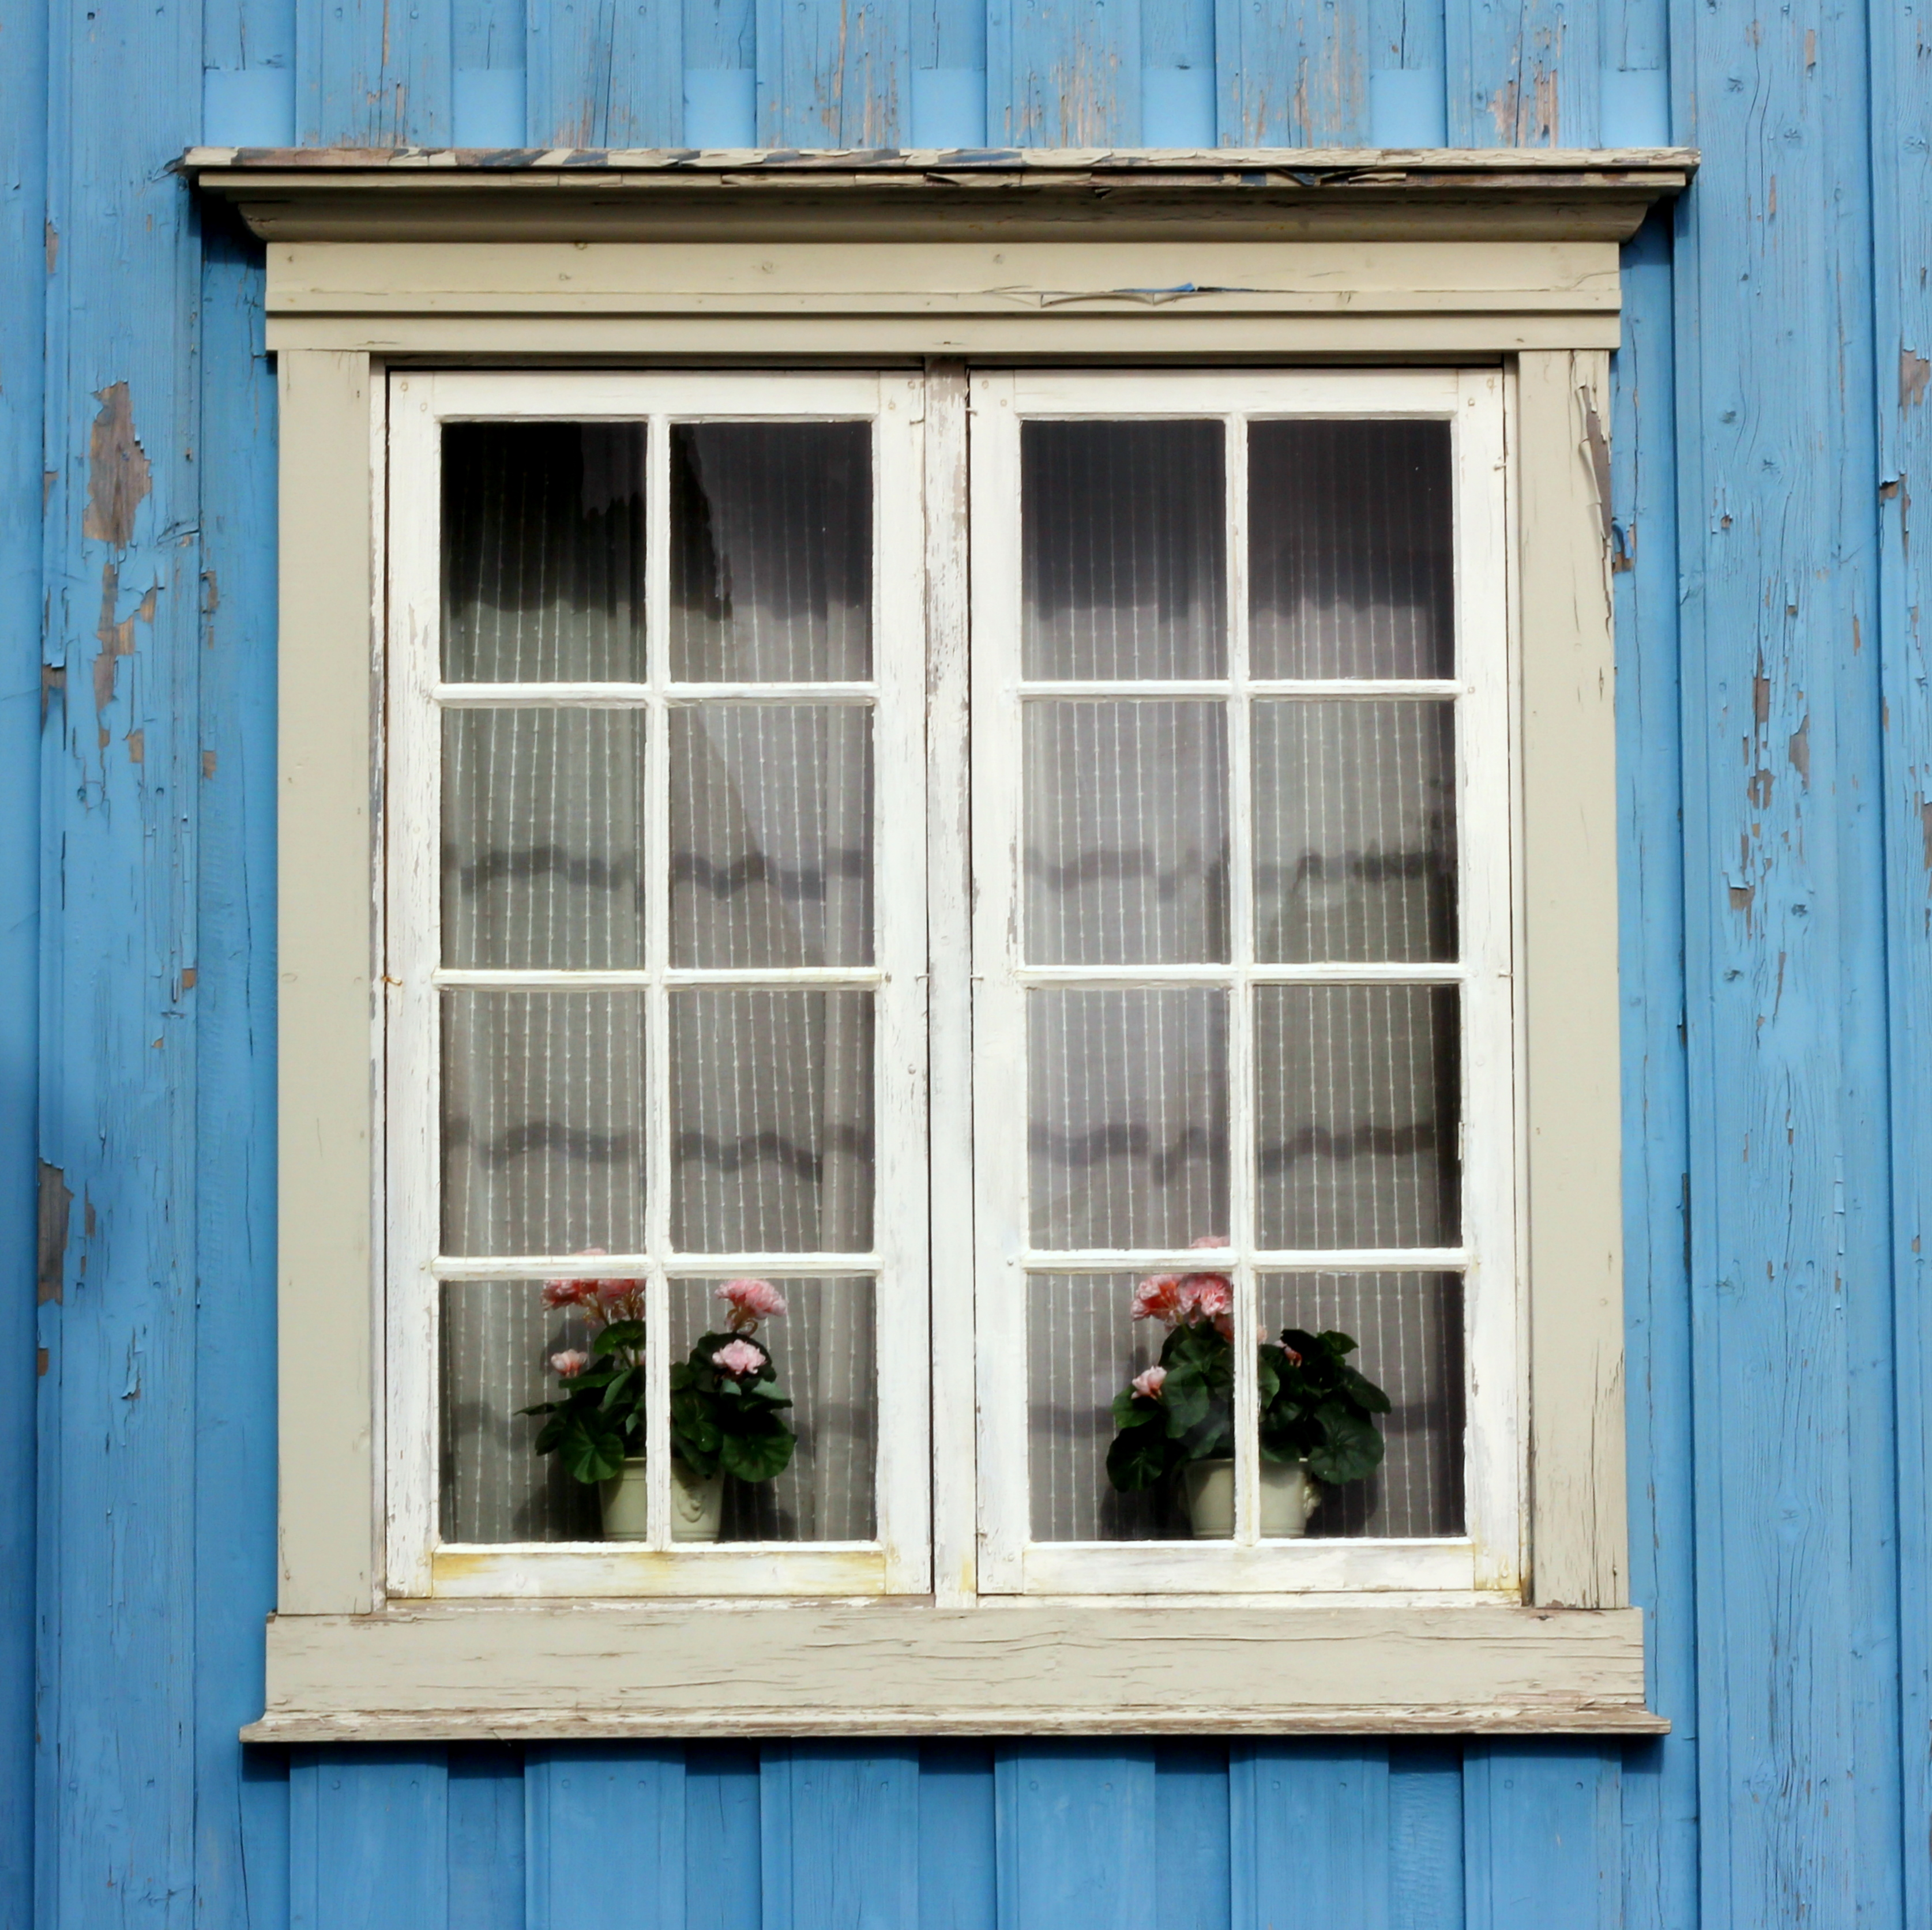 107/366 The window in the blue house – ingaphotography